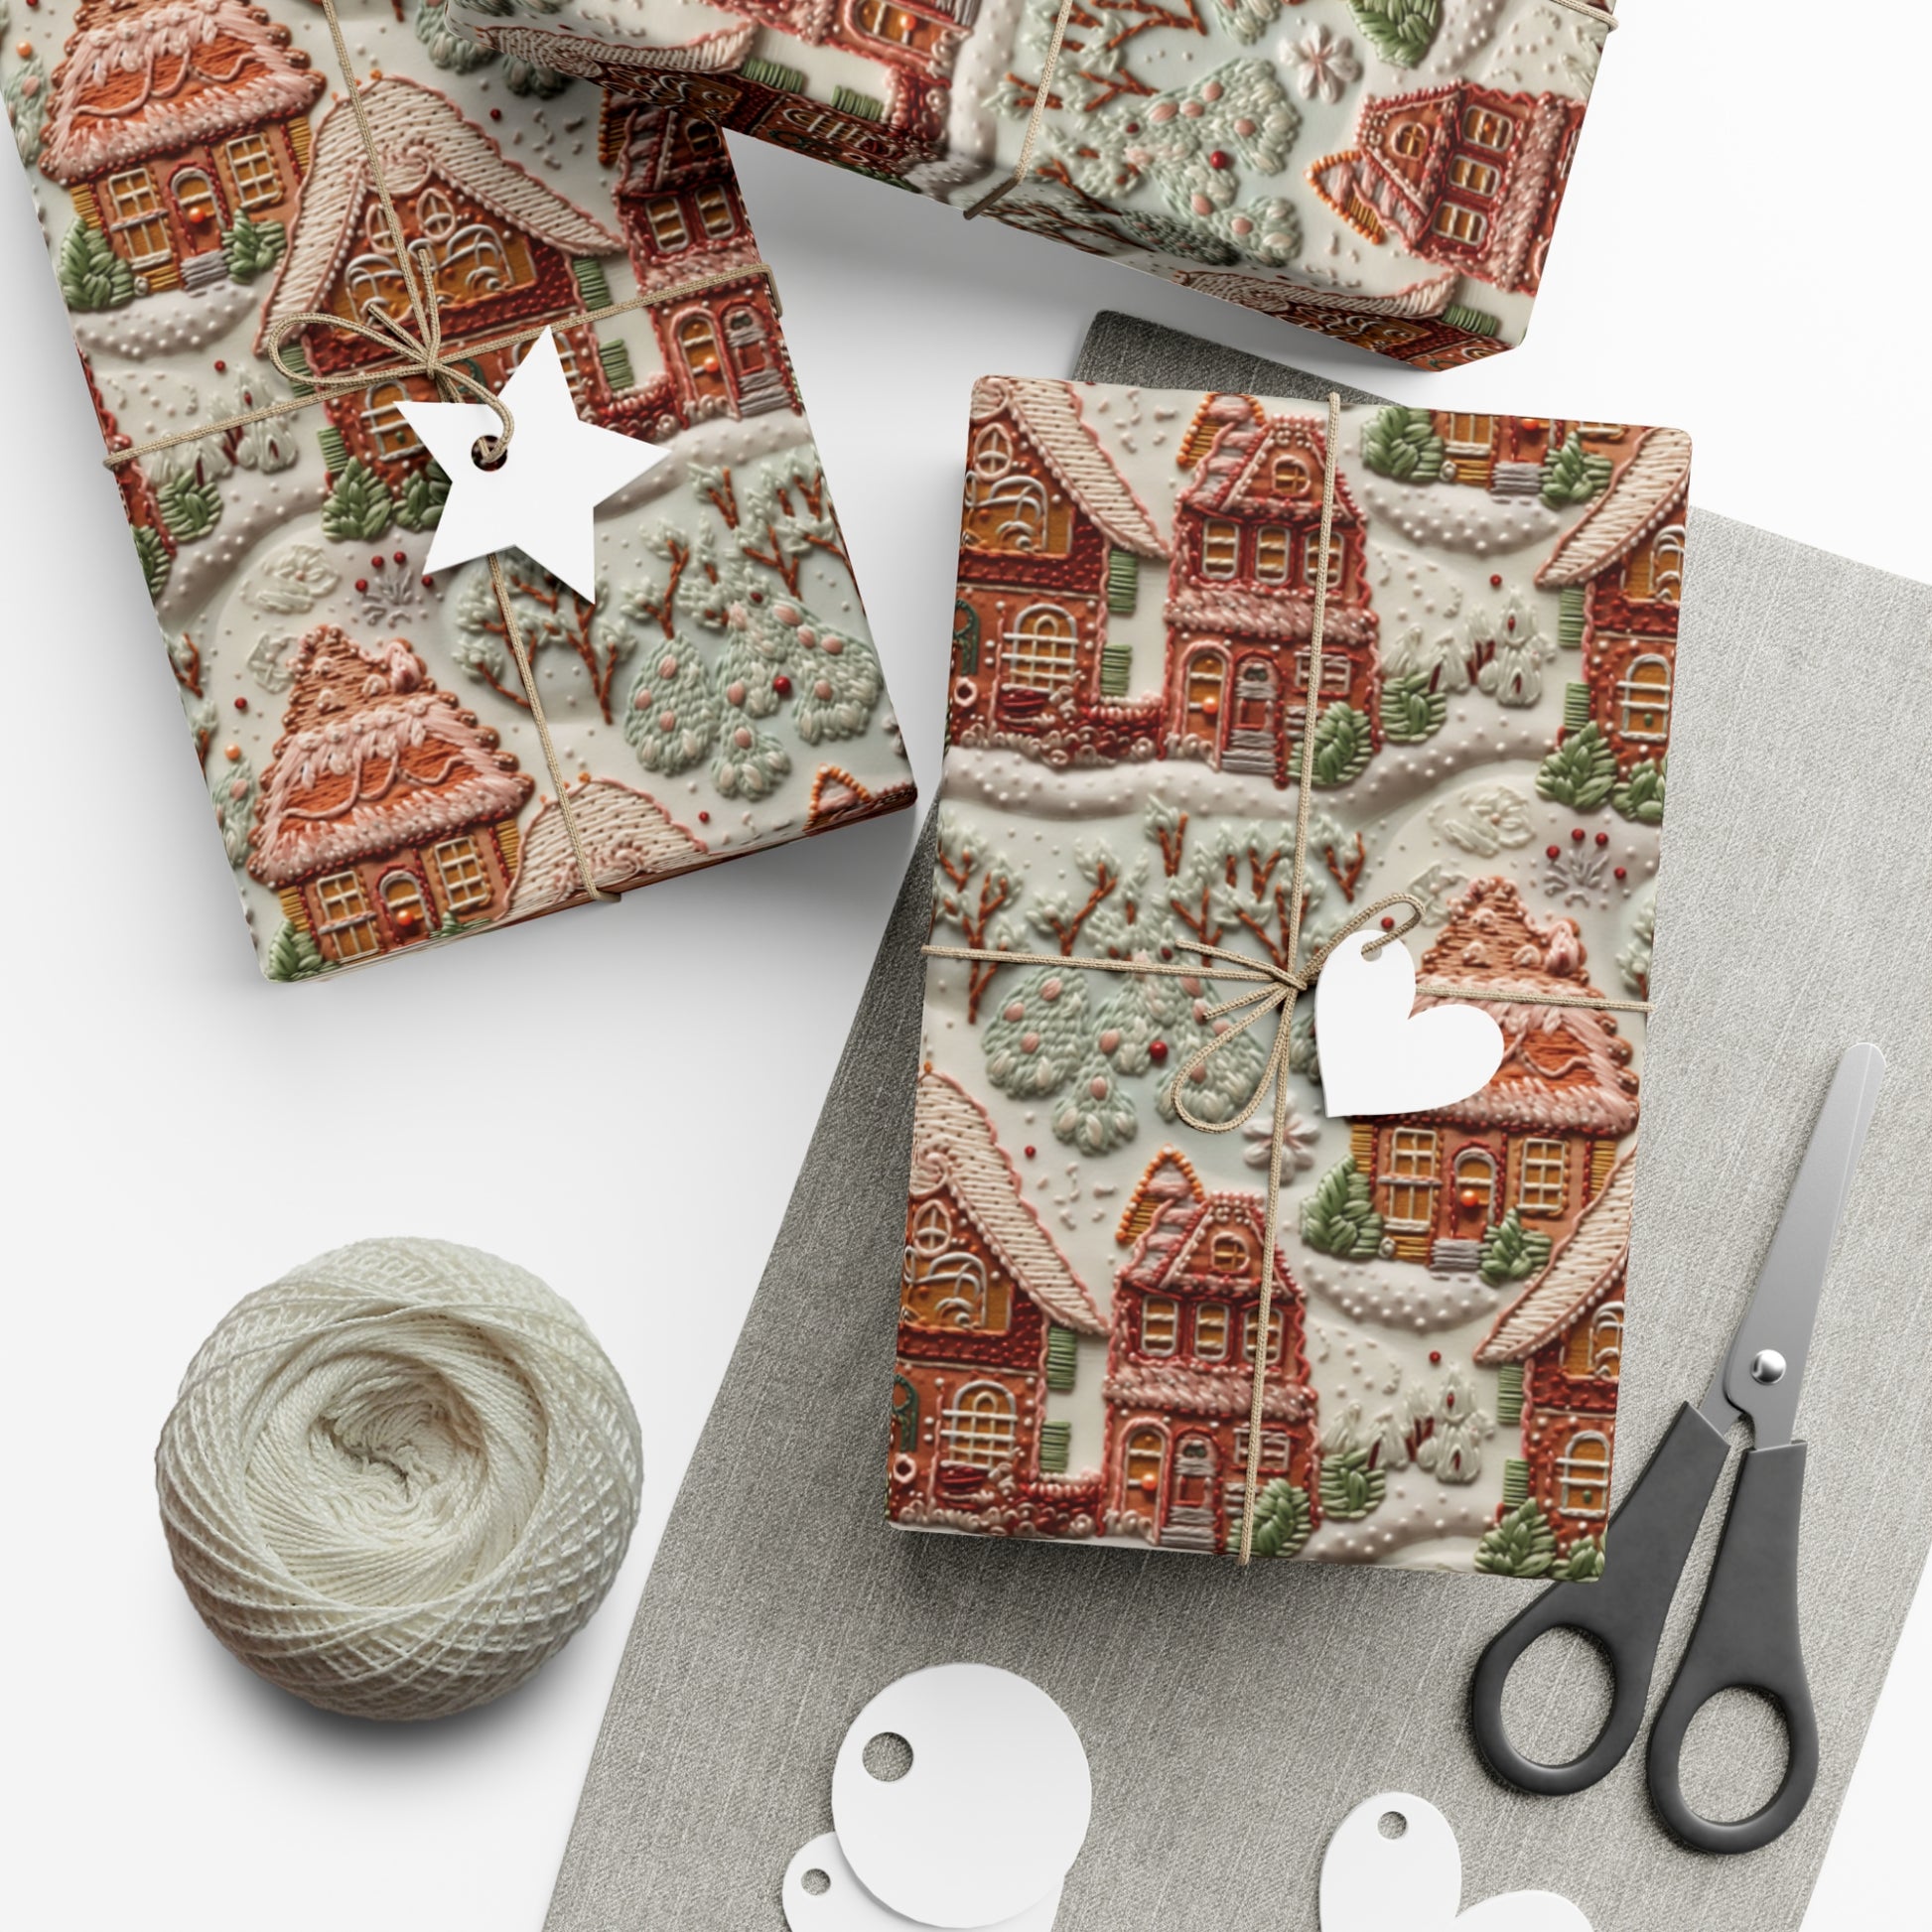 Society6 on Instagram: Take 50% off your favorite unique Wrapping Paper  today on Society6.com! Designs: 🏠 Holiday Town with Pets by  @emilydolinerart ⭐️ Big Starbursts on Green by @emilydolinerart